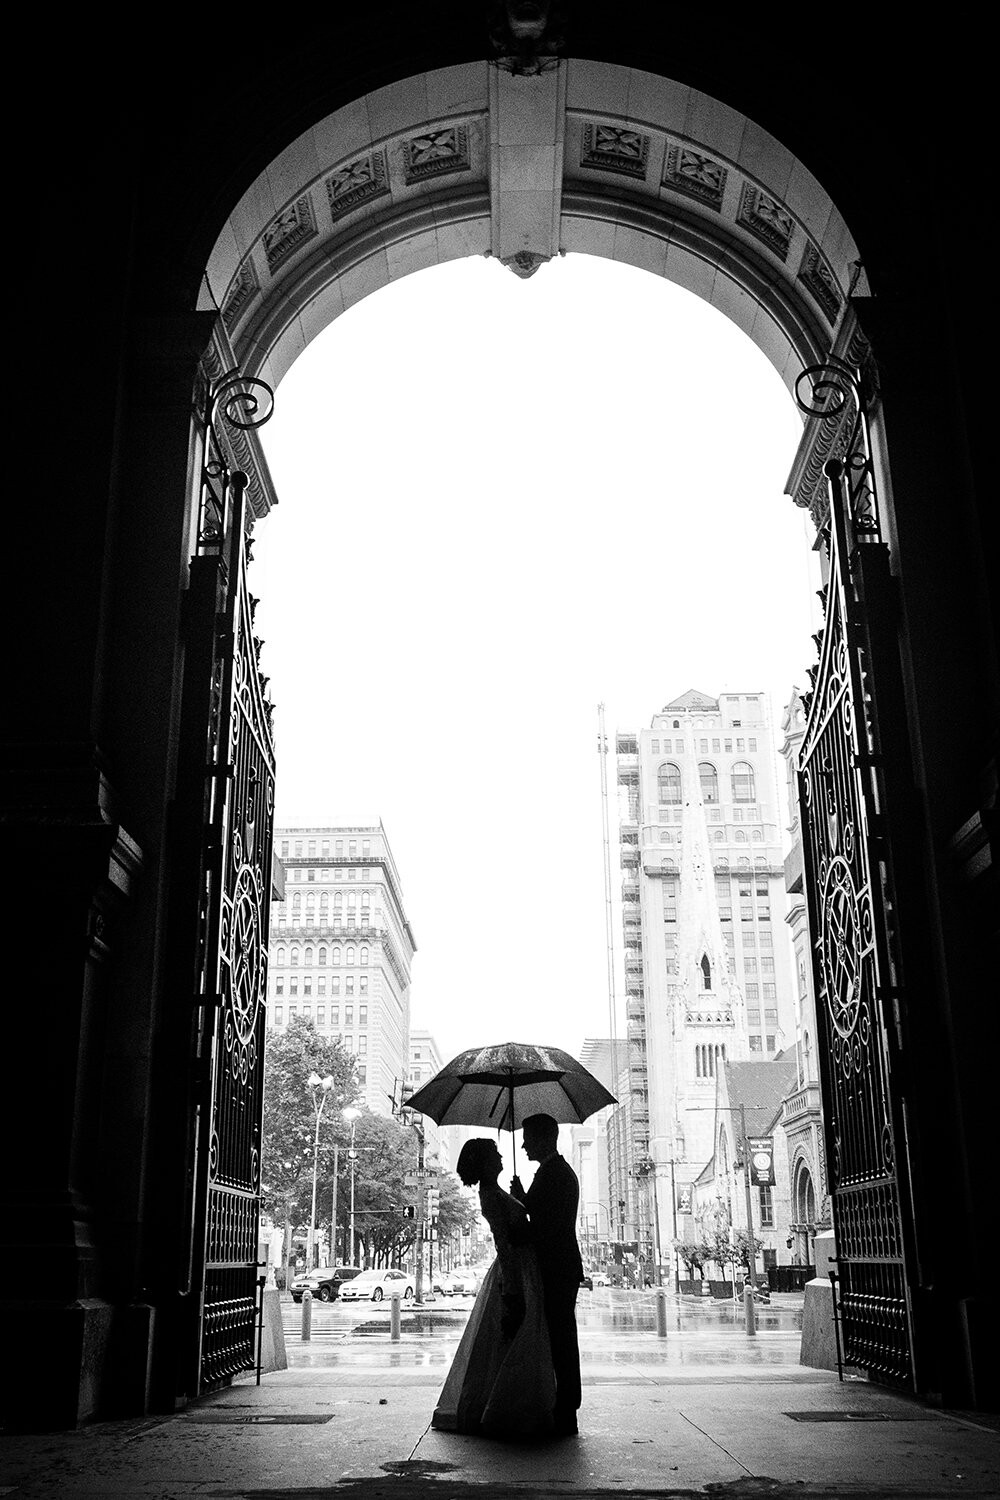 The rain was falling hard during this particular wedding. Luckily we planned to shoot around Philadelphia City Hall which is one of the most incredible masonry buildings in the world. As we were shooting it started to rain really hard so we jumped into one of the tunnels there. Seeing the light, I asked them to just hang out at the opening of the tunnel at which point the groom made a joke causing his bride to bend backwards in just the perfect way, making their silhouettes a really intriguing capture when I pressed the shutter.